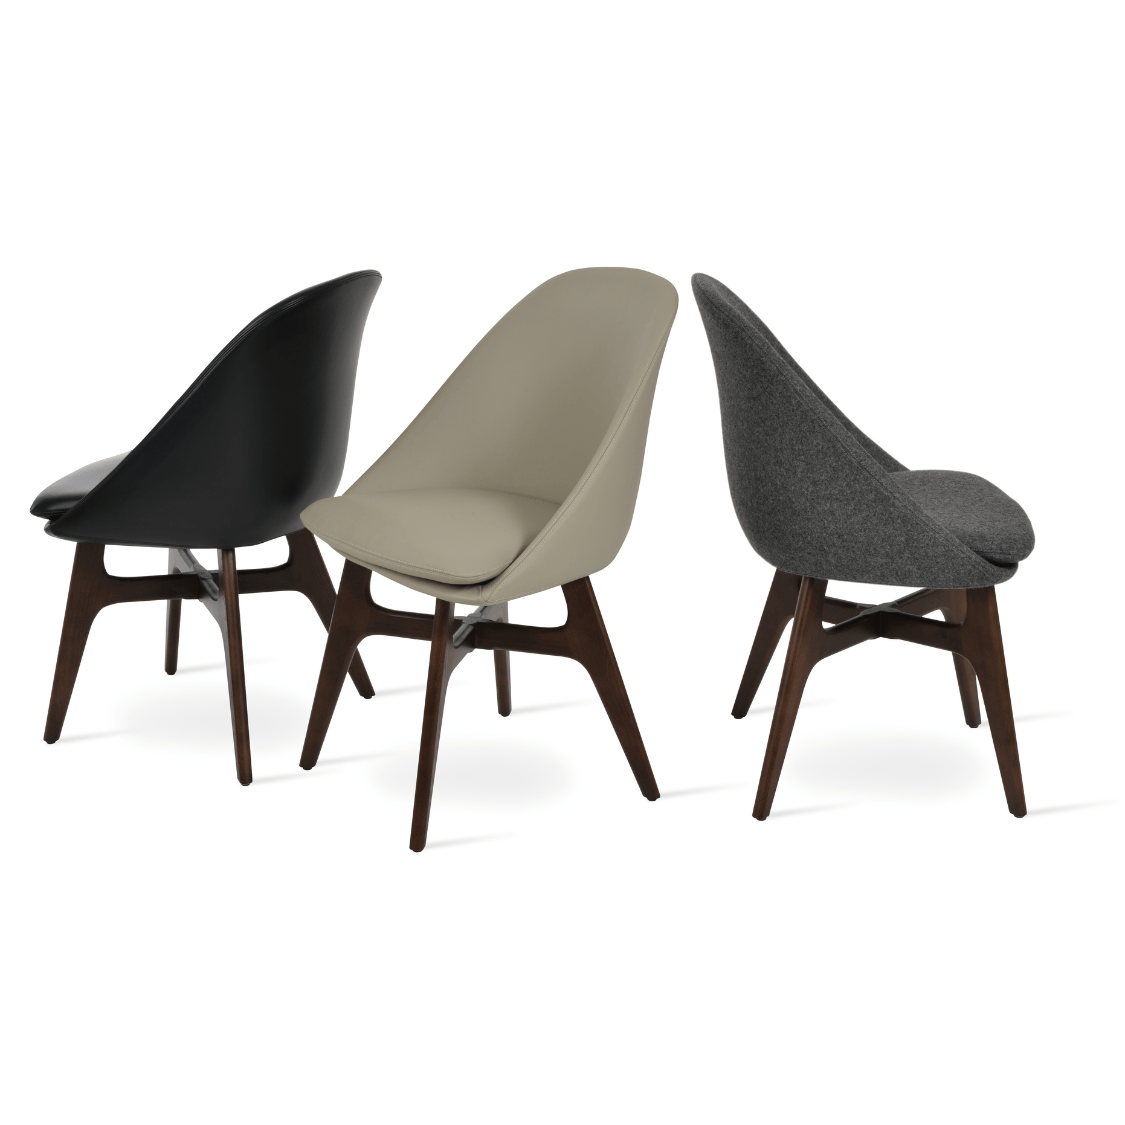 Avanos Rounded Dining Chair - Your Bar Stools Canada